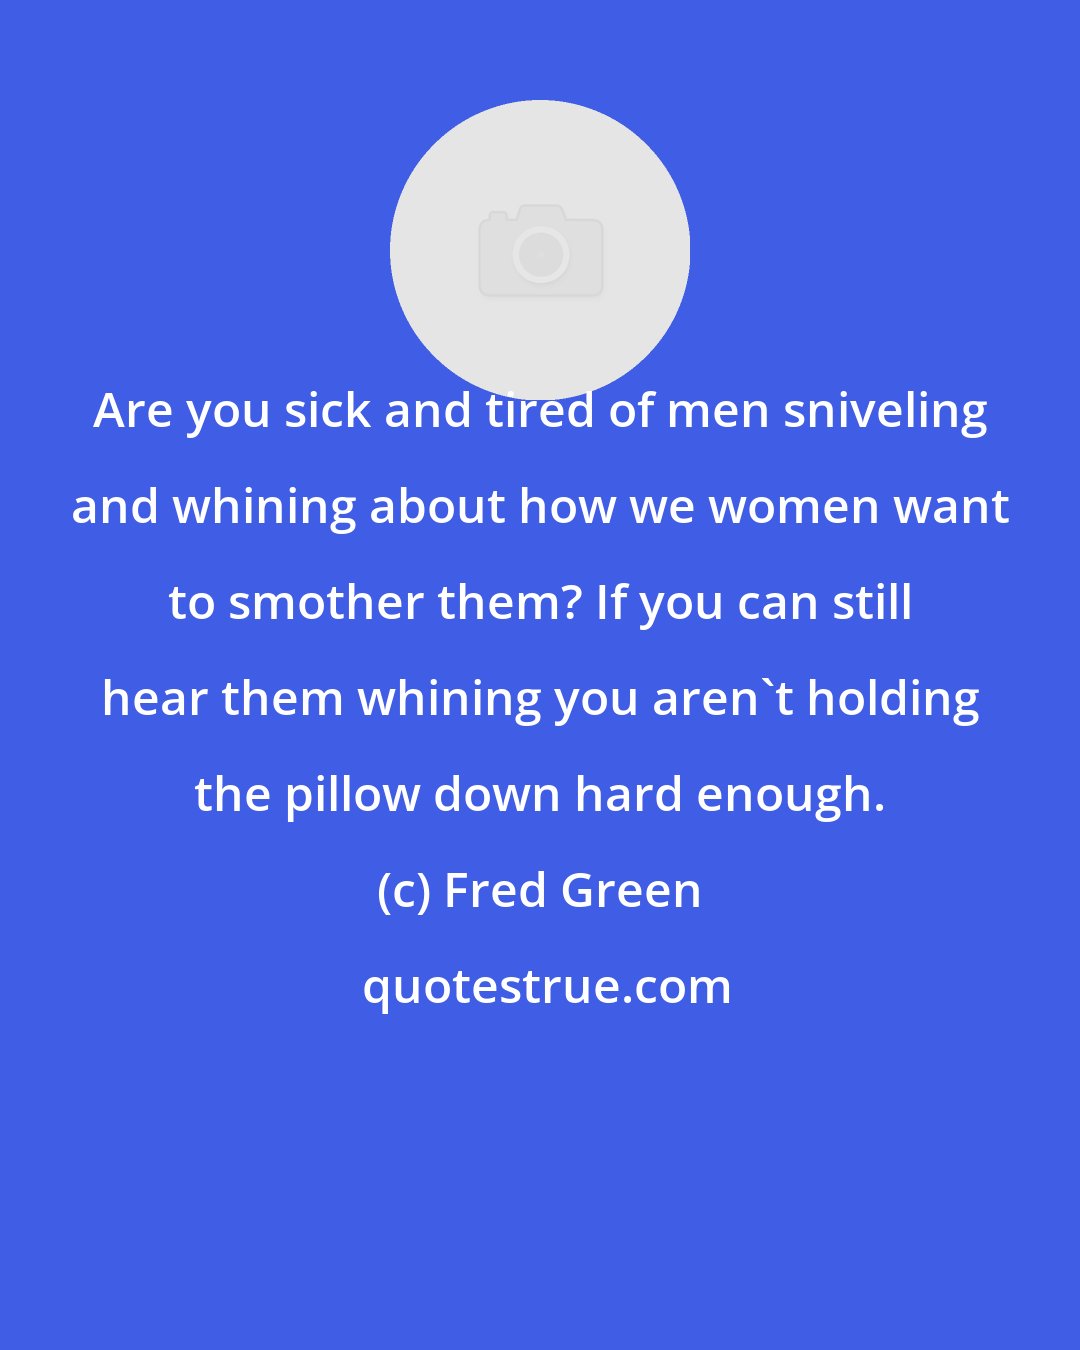 Fred Green: Are you sick and tired of men sniveling and whining about how we women want to smother them? If you can still hear them whining you aren't holding the pillow down hard enough.